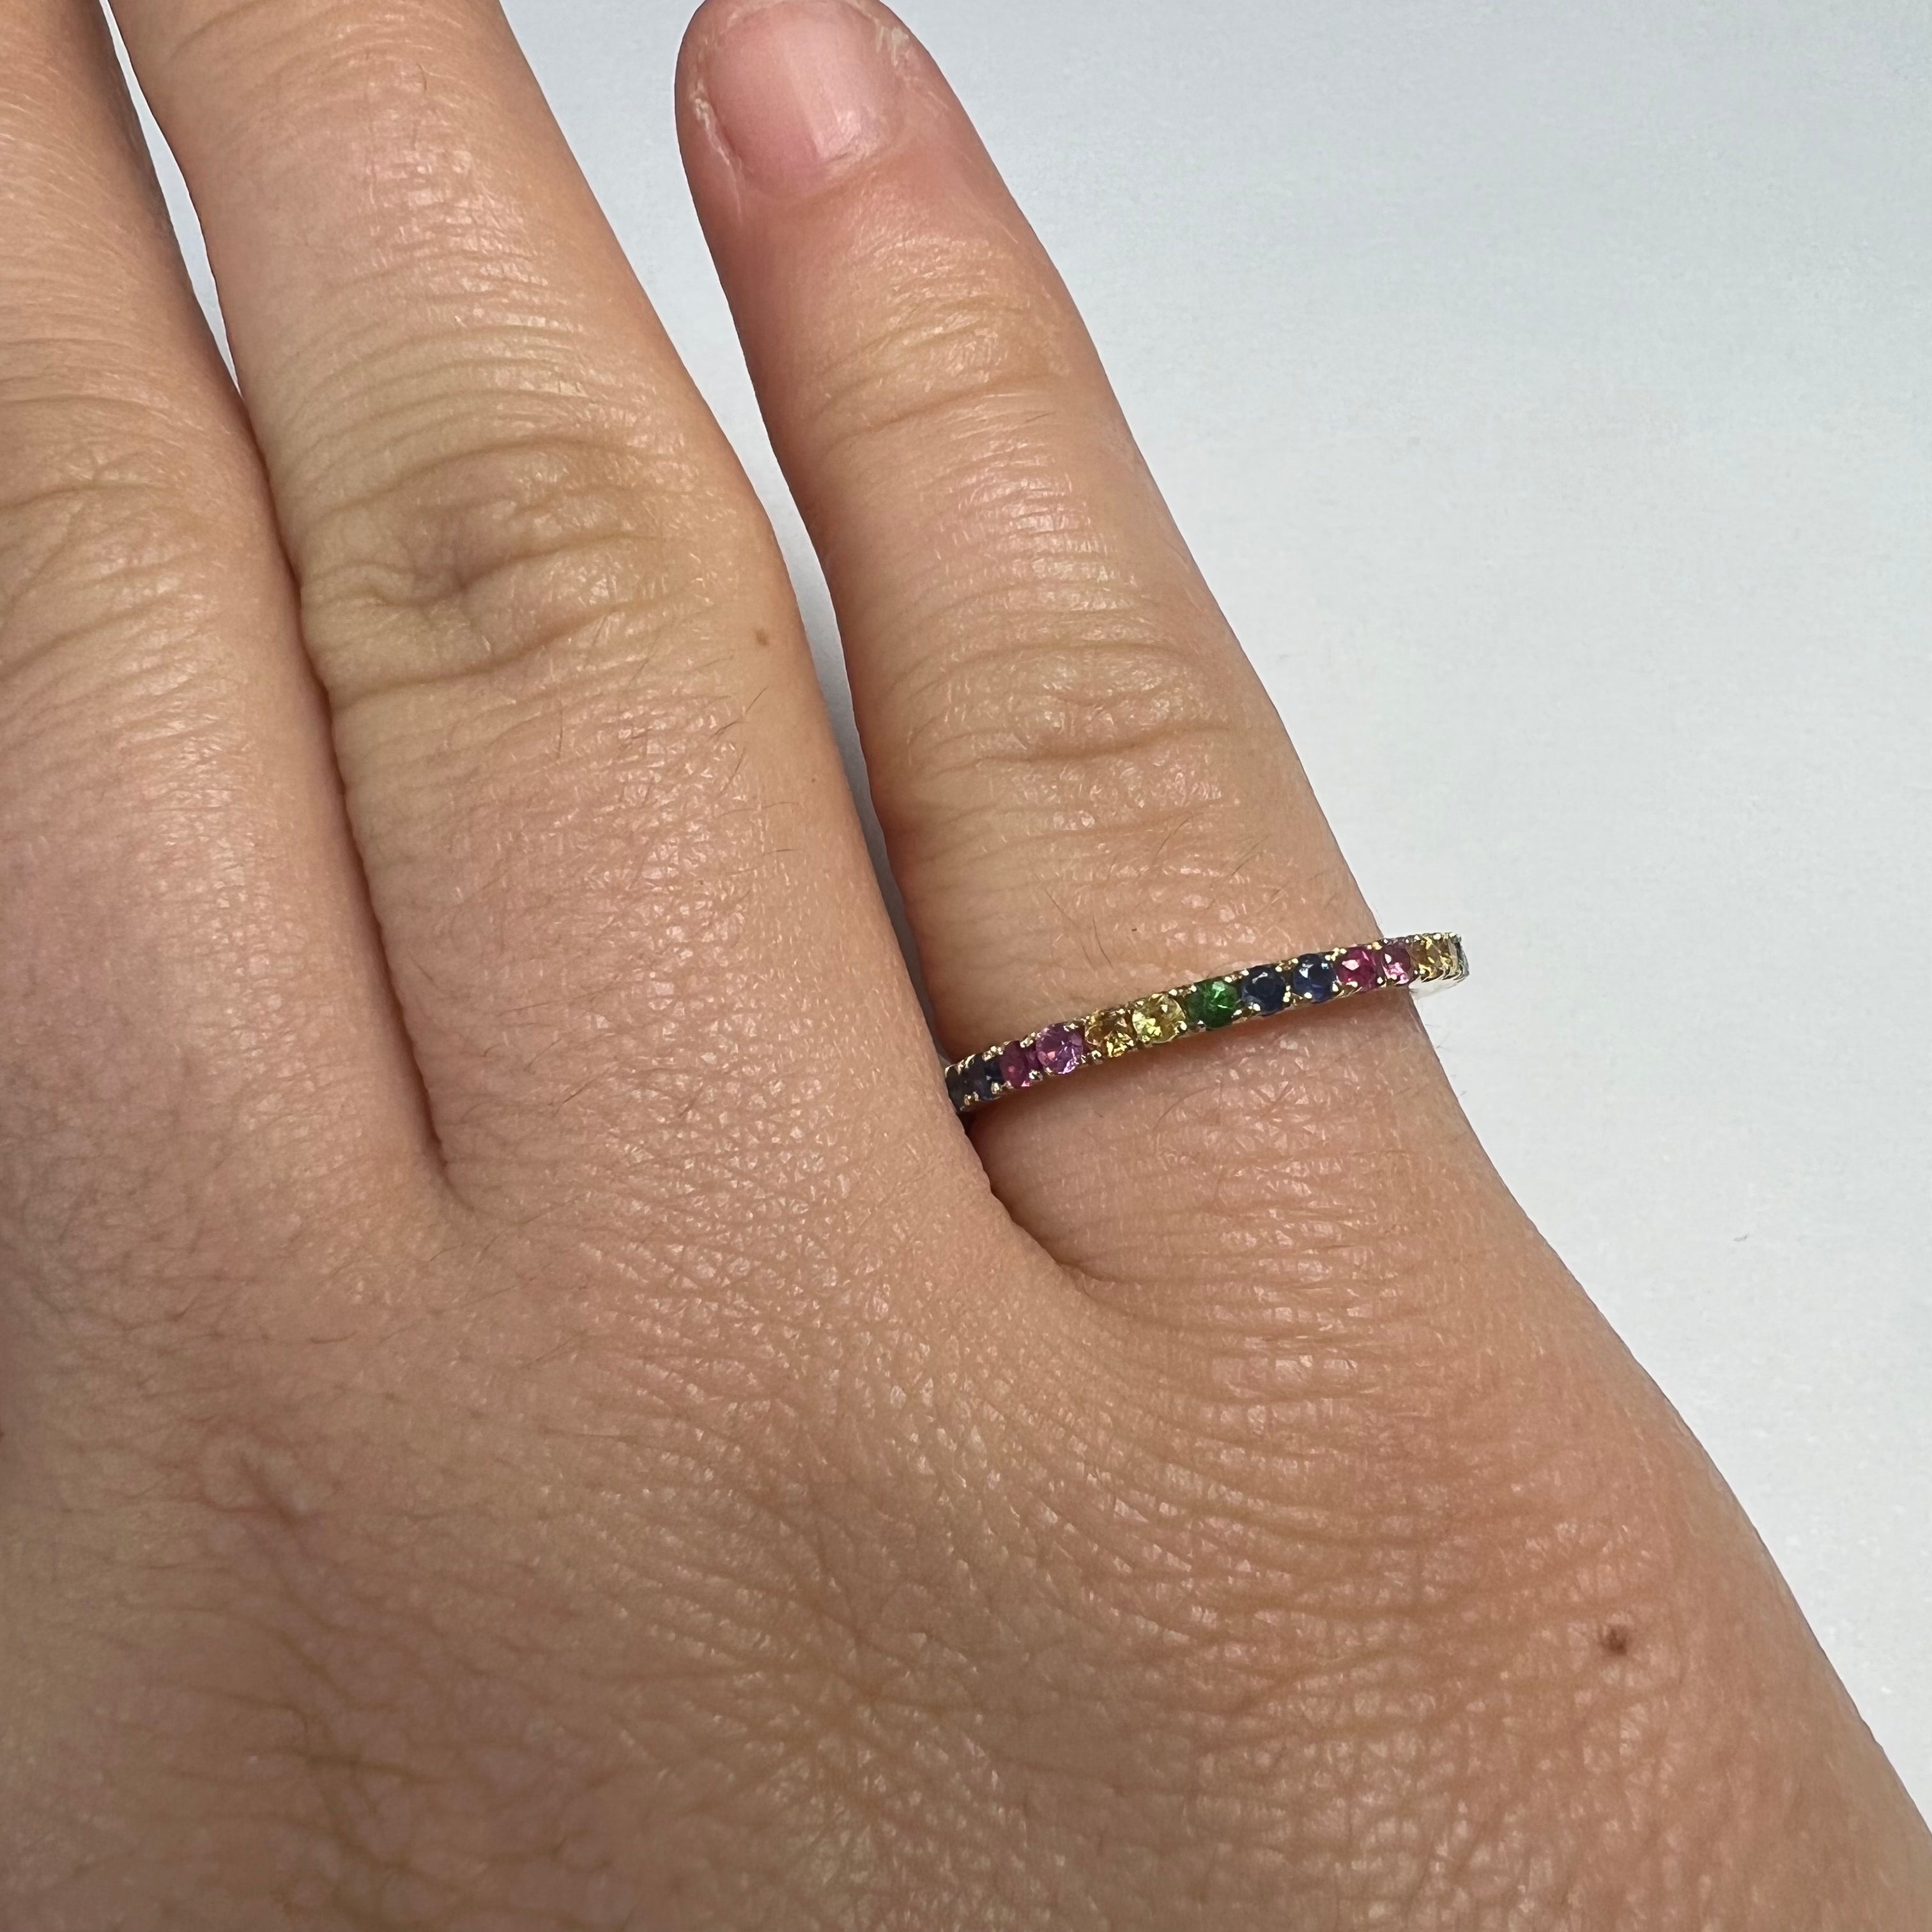 Solid 14K Yellow Gold Natural Rainbow Sapphire Eternity Ring Band Size 6.5